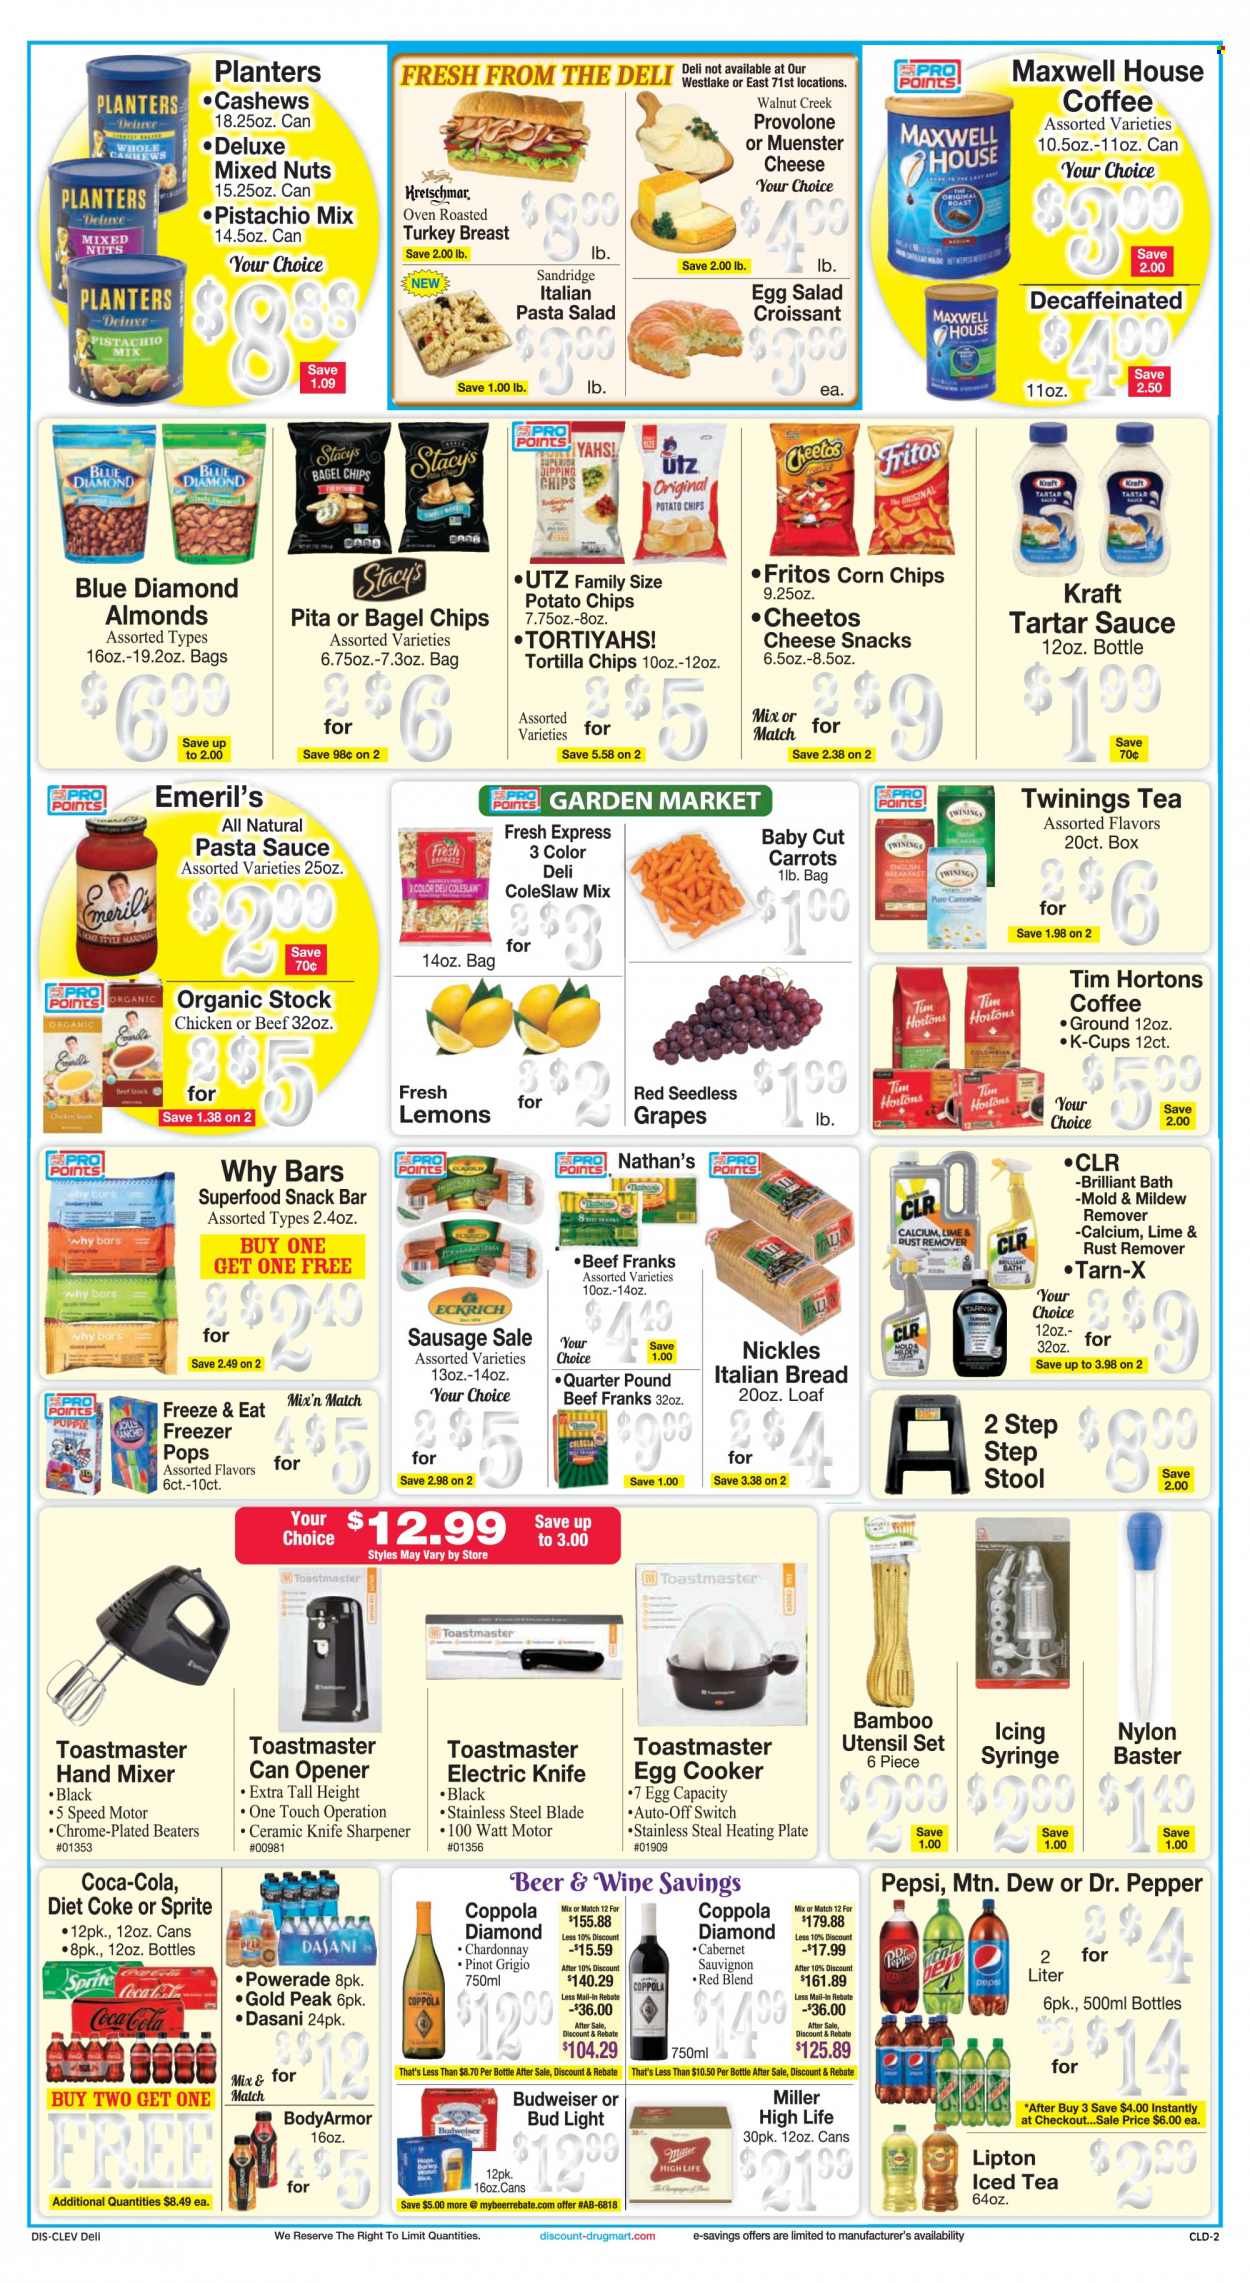 thumbnail - Discount Drug Mart Flyer - 03/29/2023 - 04/04/2023 - Sales products - bagels, bread, carrots, salad, grapes, seedless grapes, pears, coleslaw, pasta sauce, Kraft®, roast, sausage, pasta salad, Münster cheese, Provolone, tartar sauce, snack, snack bar, Fritos, tortilla chips, potato chips, Cheetos, chips, corn chips, rice, almonds, cashews, mixed nuts, Planters, Blue Diamond, Coca-Cola, Mountain Dew, Sprite, Powerade, Pepsi, Lipton, ice tea, Dr. Pepper, Diet Coke, Coke, water, Maxwell House, Twinings, coffee capsules, K-Cups, Cabernet Sauvignon, red wine, white wine, Chardonnay, wine, Pinot Grigio, beer, Bud Light, Miller, chicken, bag, knife, sharpener, plate, knife sharpener, calcium, Budweiser, lemons. Page 2.